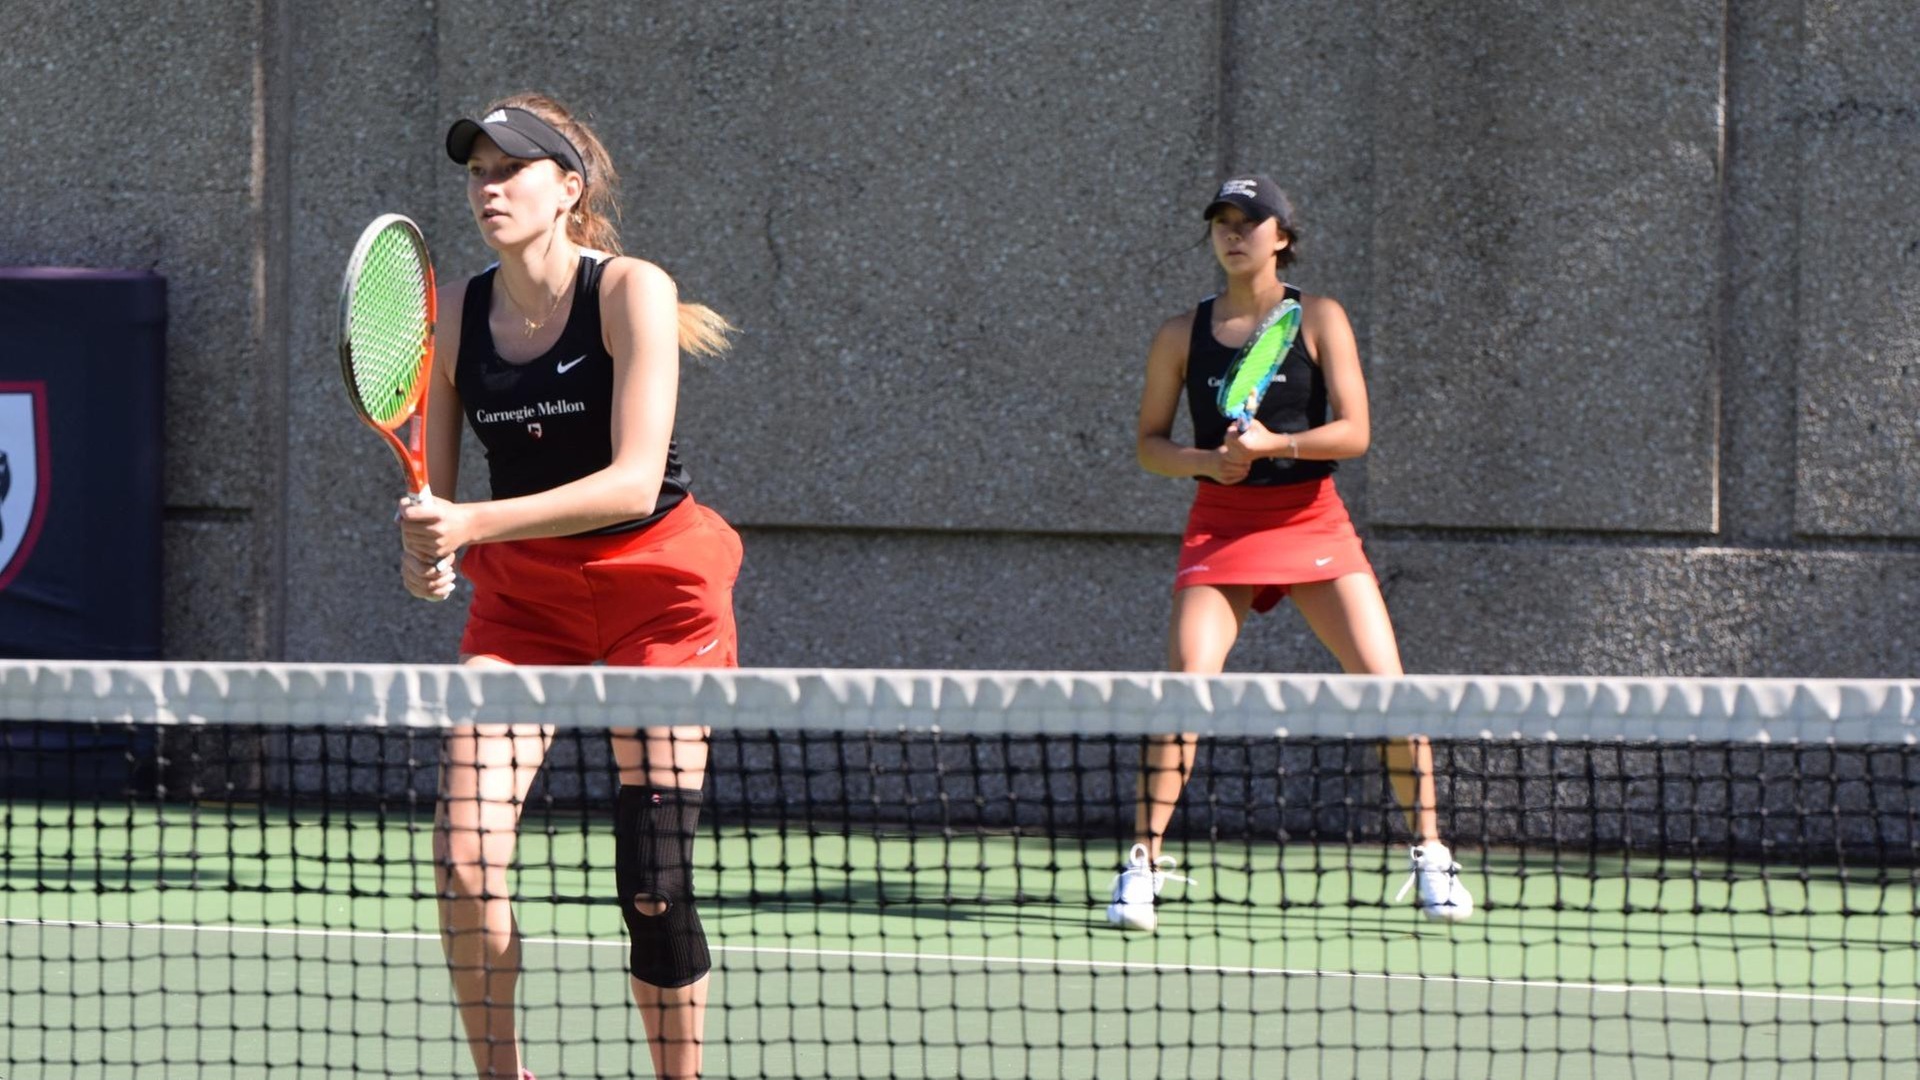 women's tennis doubles team with one player near net and second player at back line